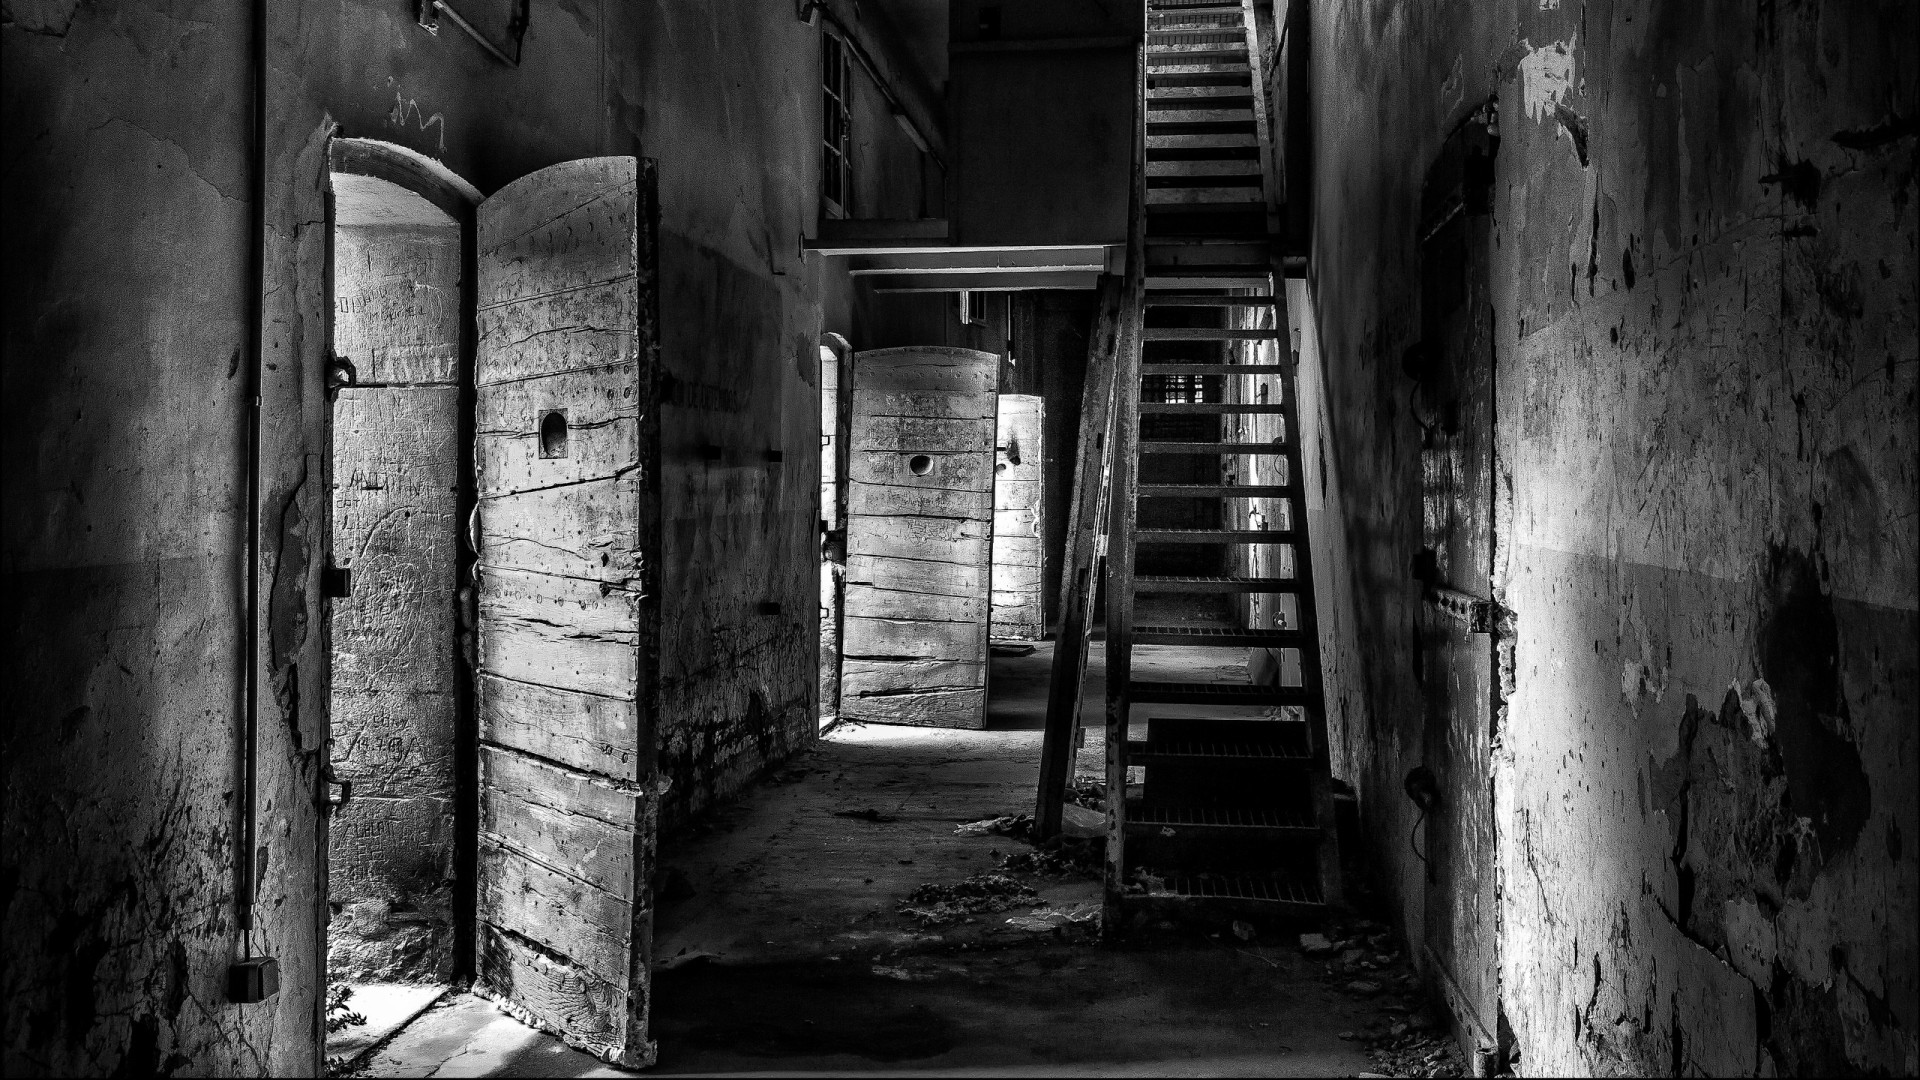 Monochrome Building Architecture Abandoned Prisons Prison Door Stairs HDR Hallway 1920x1080